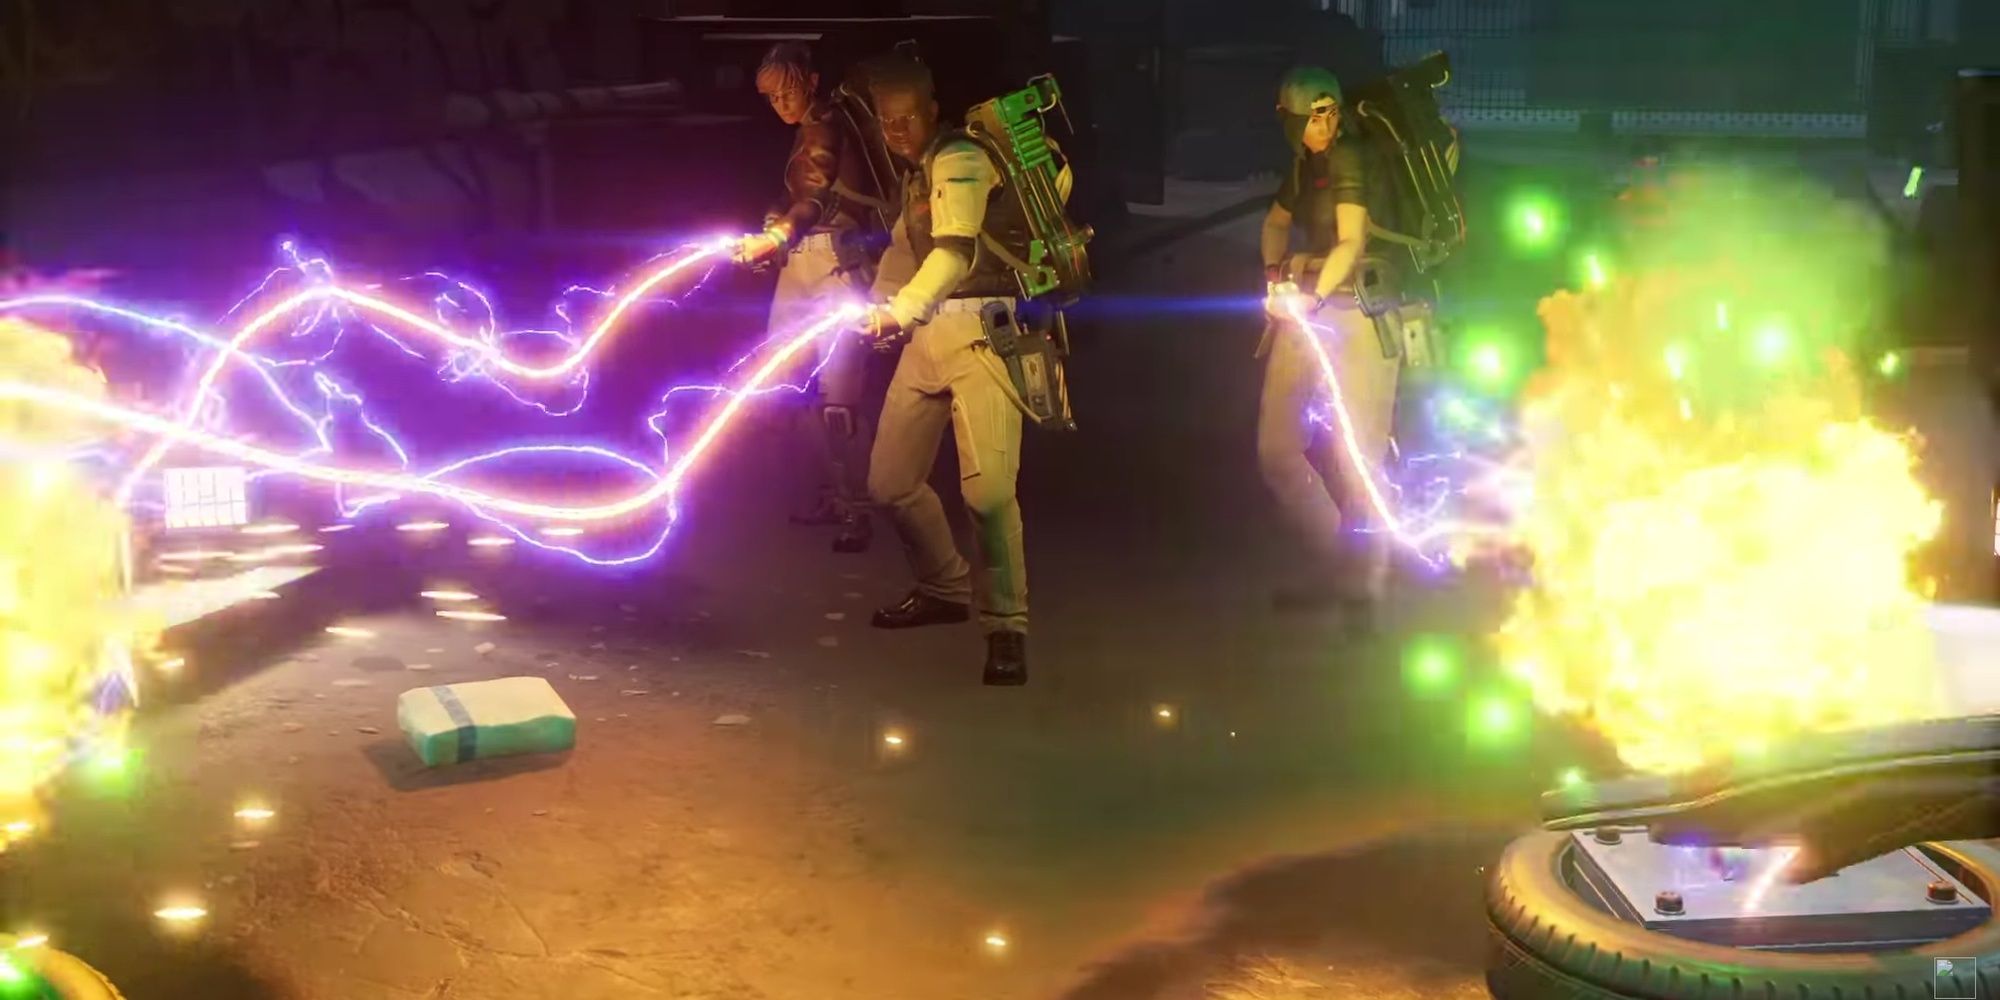 Ghostbusters: Spirits Unleashed - Trainee Ghostbusters using the Proton Pack